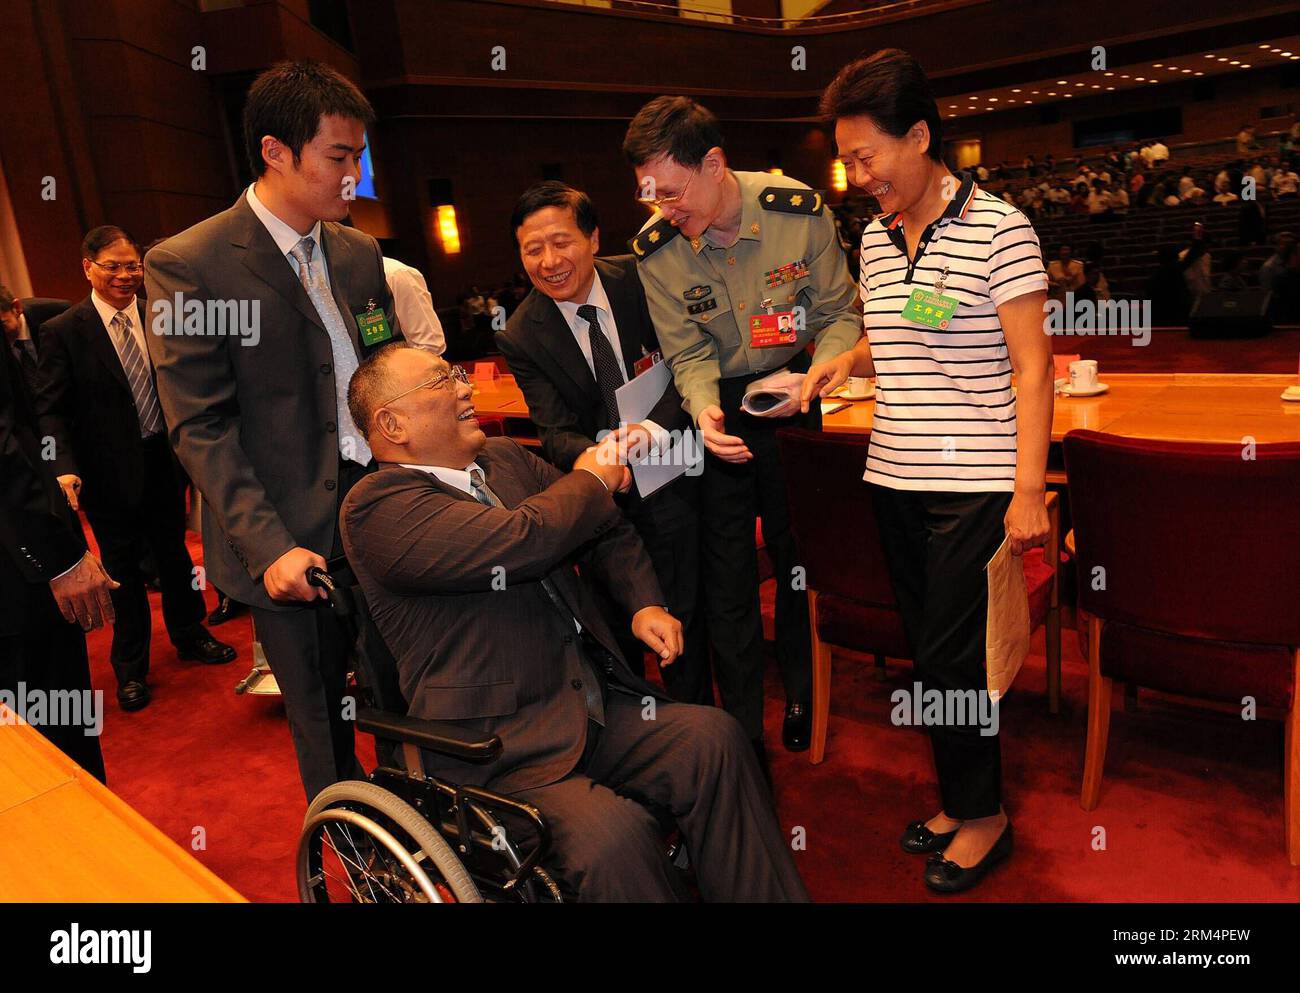 Bildnummer: 60499968  Datum: 19.09.2013  Copyright: imago/Xinhua (130919) -- BEIJING, Sept. 19, 2013 (Xinhua) -- congratulate Deng Pufang (front, L), honorable chairman of the China Disabled Persons Federation (CDPF), after he was reelected at the organization s sixth national congress in Beijing, capital of China, Sept. 19, 2013. Wheelchair-bound writer Zhang Haidi was reelected as chairwoman of the CDPF at the congress on Thursday. (Xinhua/He Junchang) (wqq) CHINA-BEIJING-DISABLED PERSONS FEDERATION-NATIONAL CONGRESS (CN) PUBLICATIONxNOTxINxCHN xcb x0x 2013 quer      60499968 Date 19 09 2013 Stock Photo